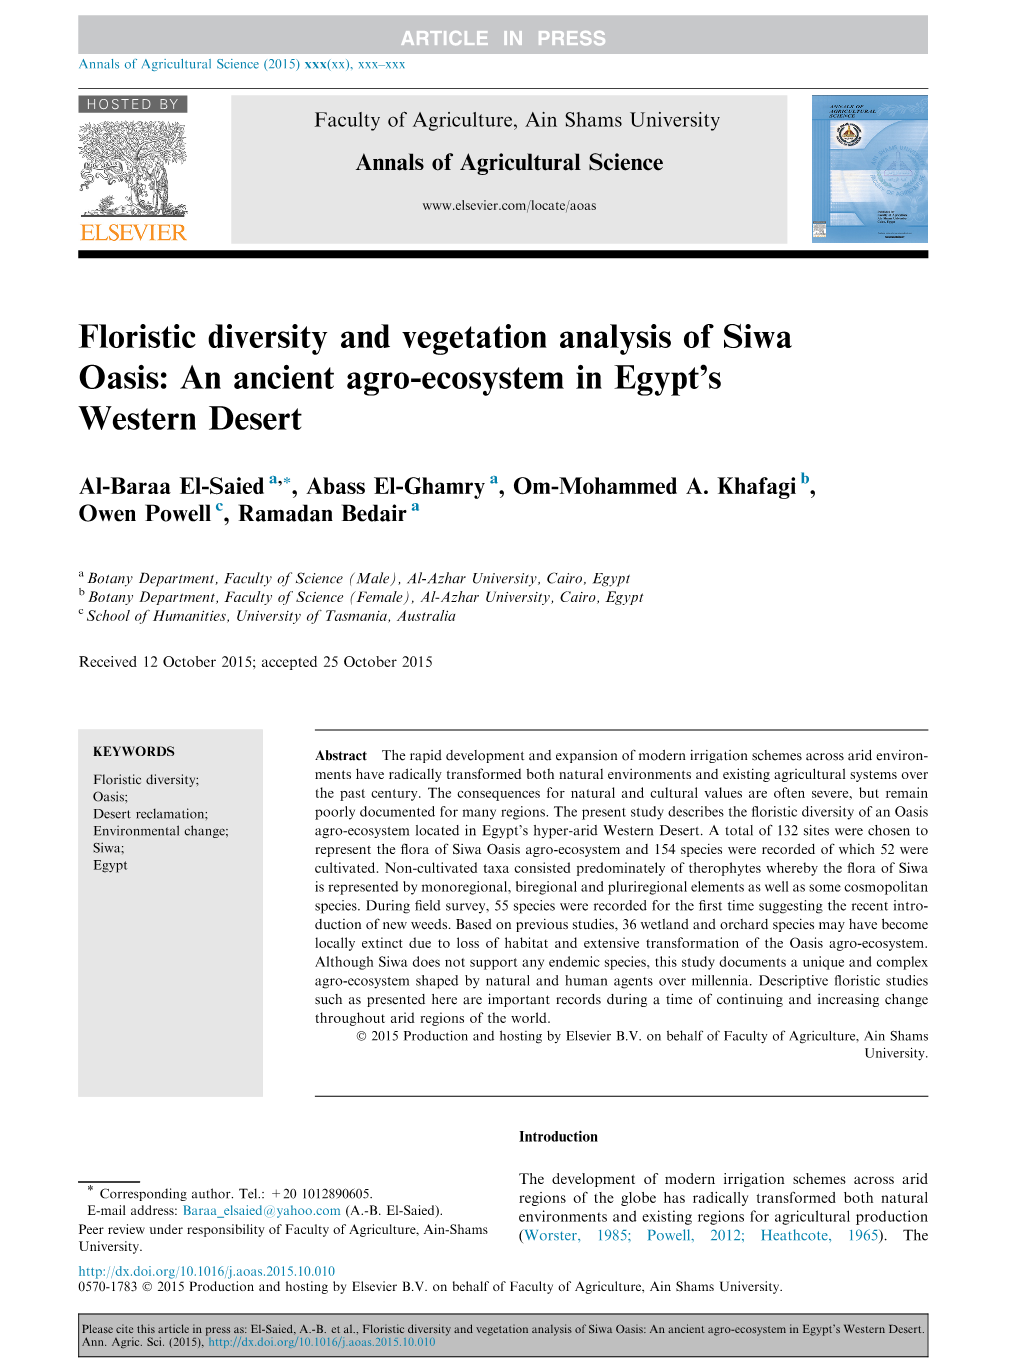 Floristic Diversity and Vegetation Analysis of Siwa Oasis: an Ancient Agro-Ecosystem in Egyptâ€™S Western Desert